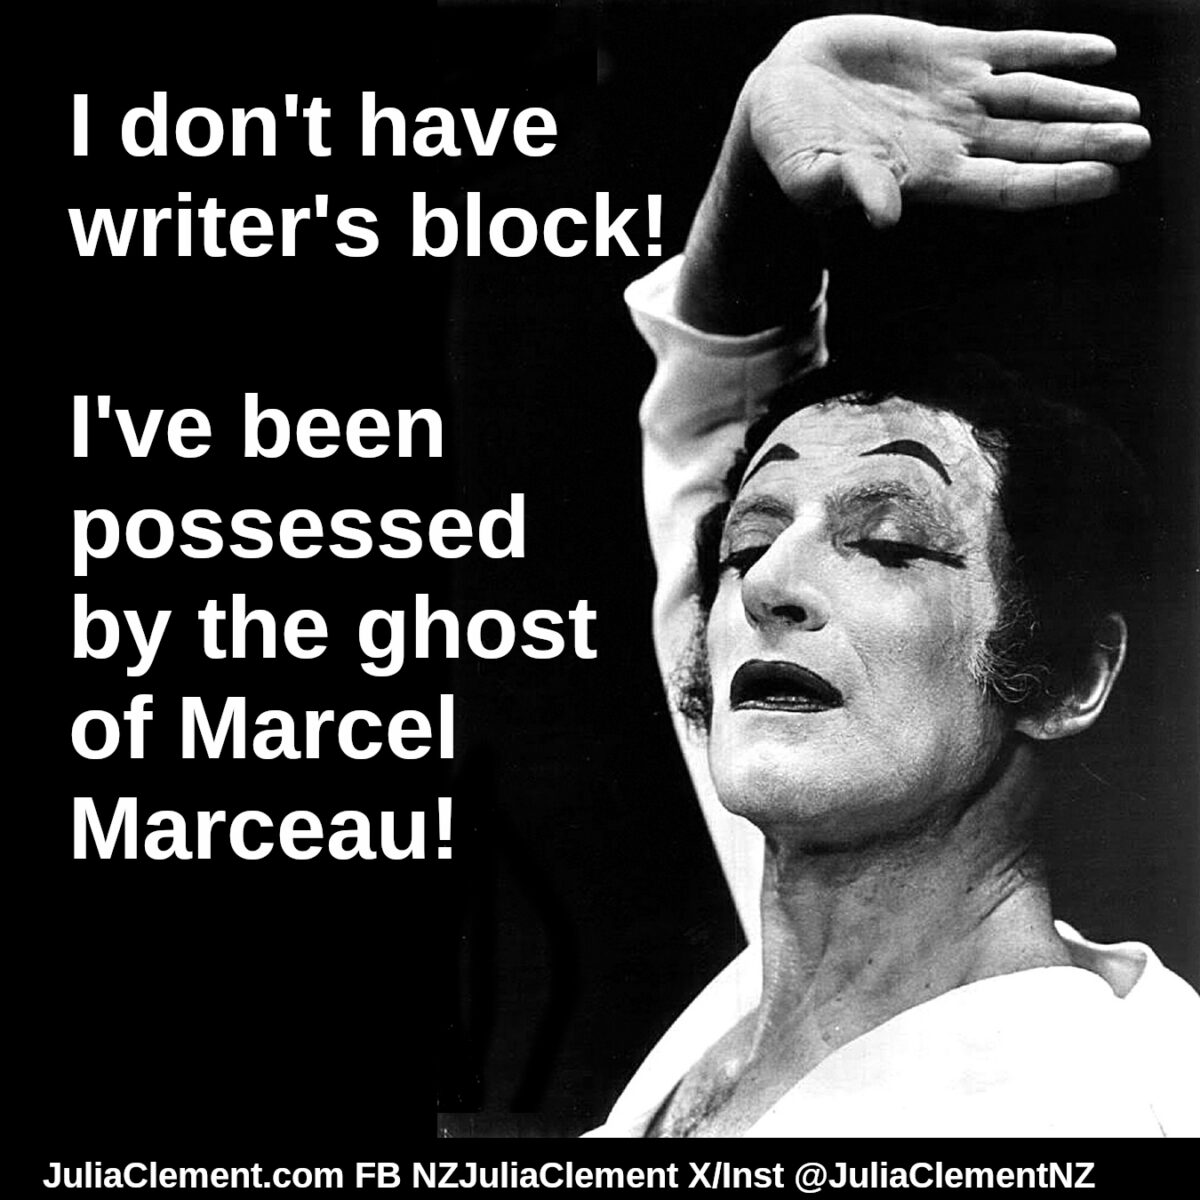 A photo of Marcel Marceau with the text "I don't have writer's block! I've been possessed by the ghost of Marcel Marceau!"